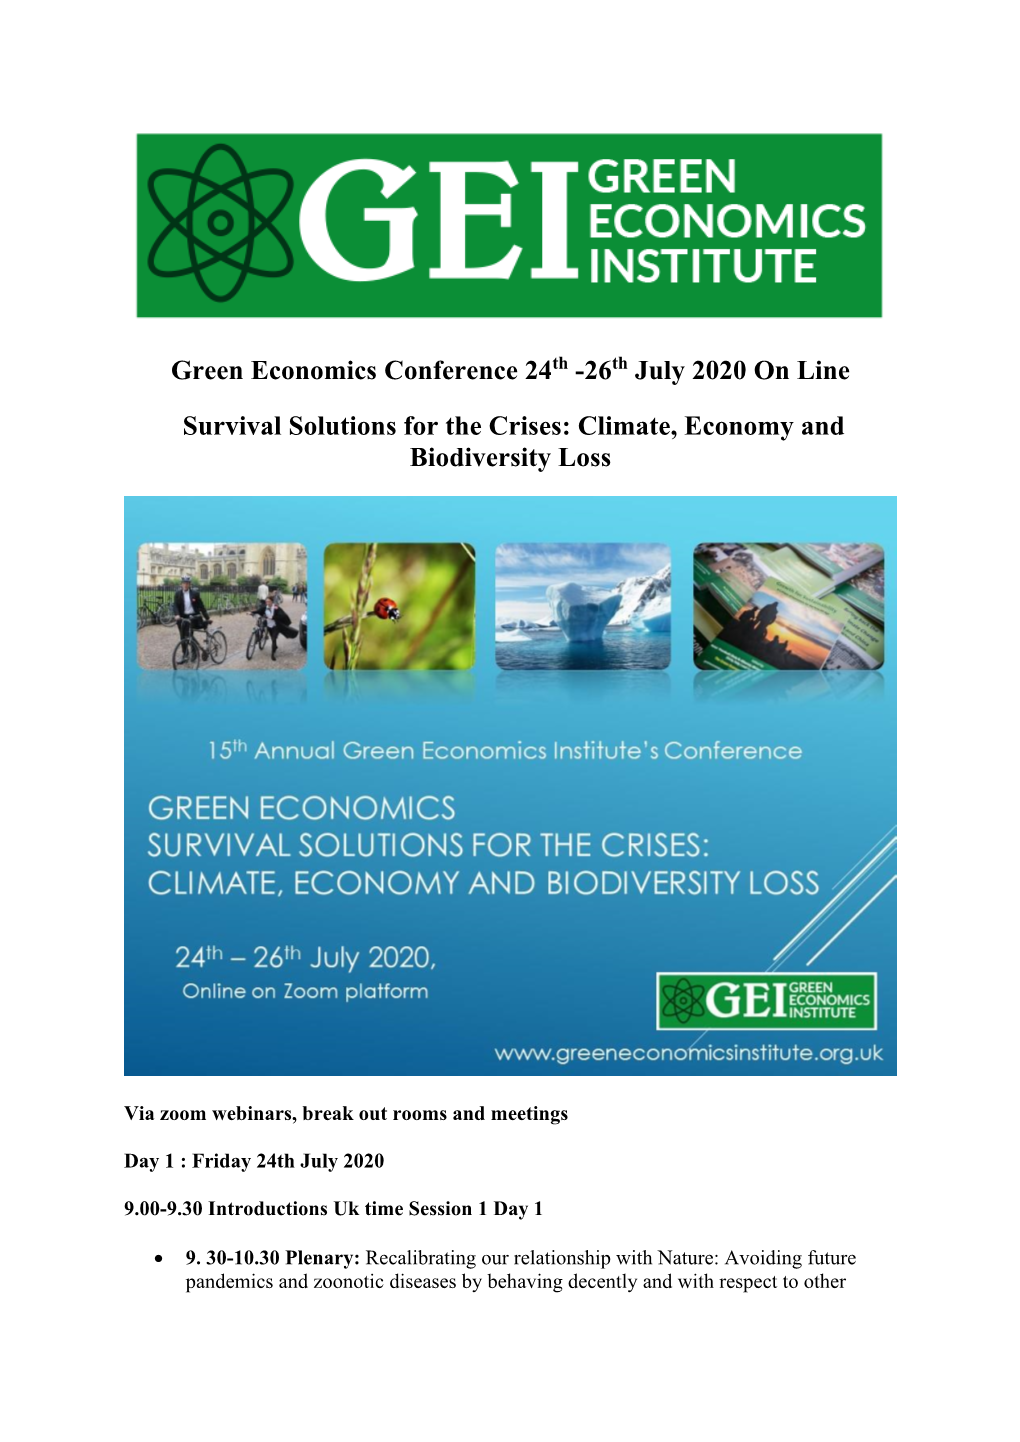 Green Economics Conference 24Th -26Th July 2020 on Line Survival